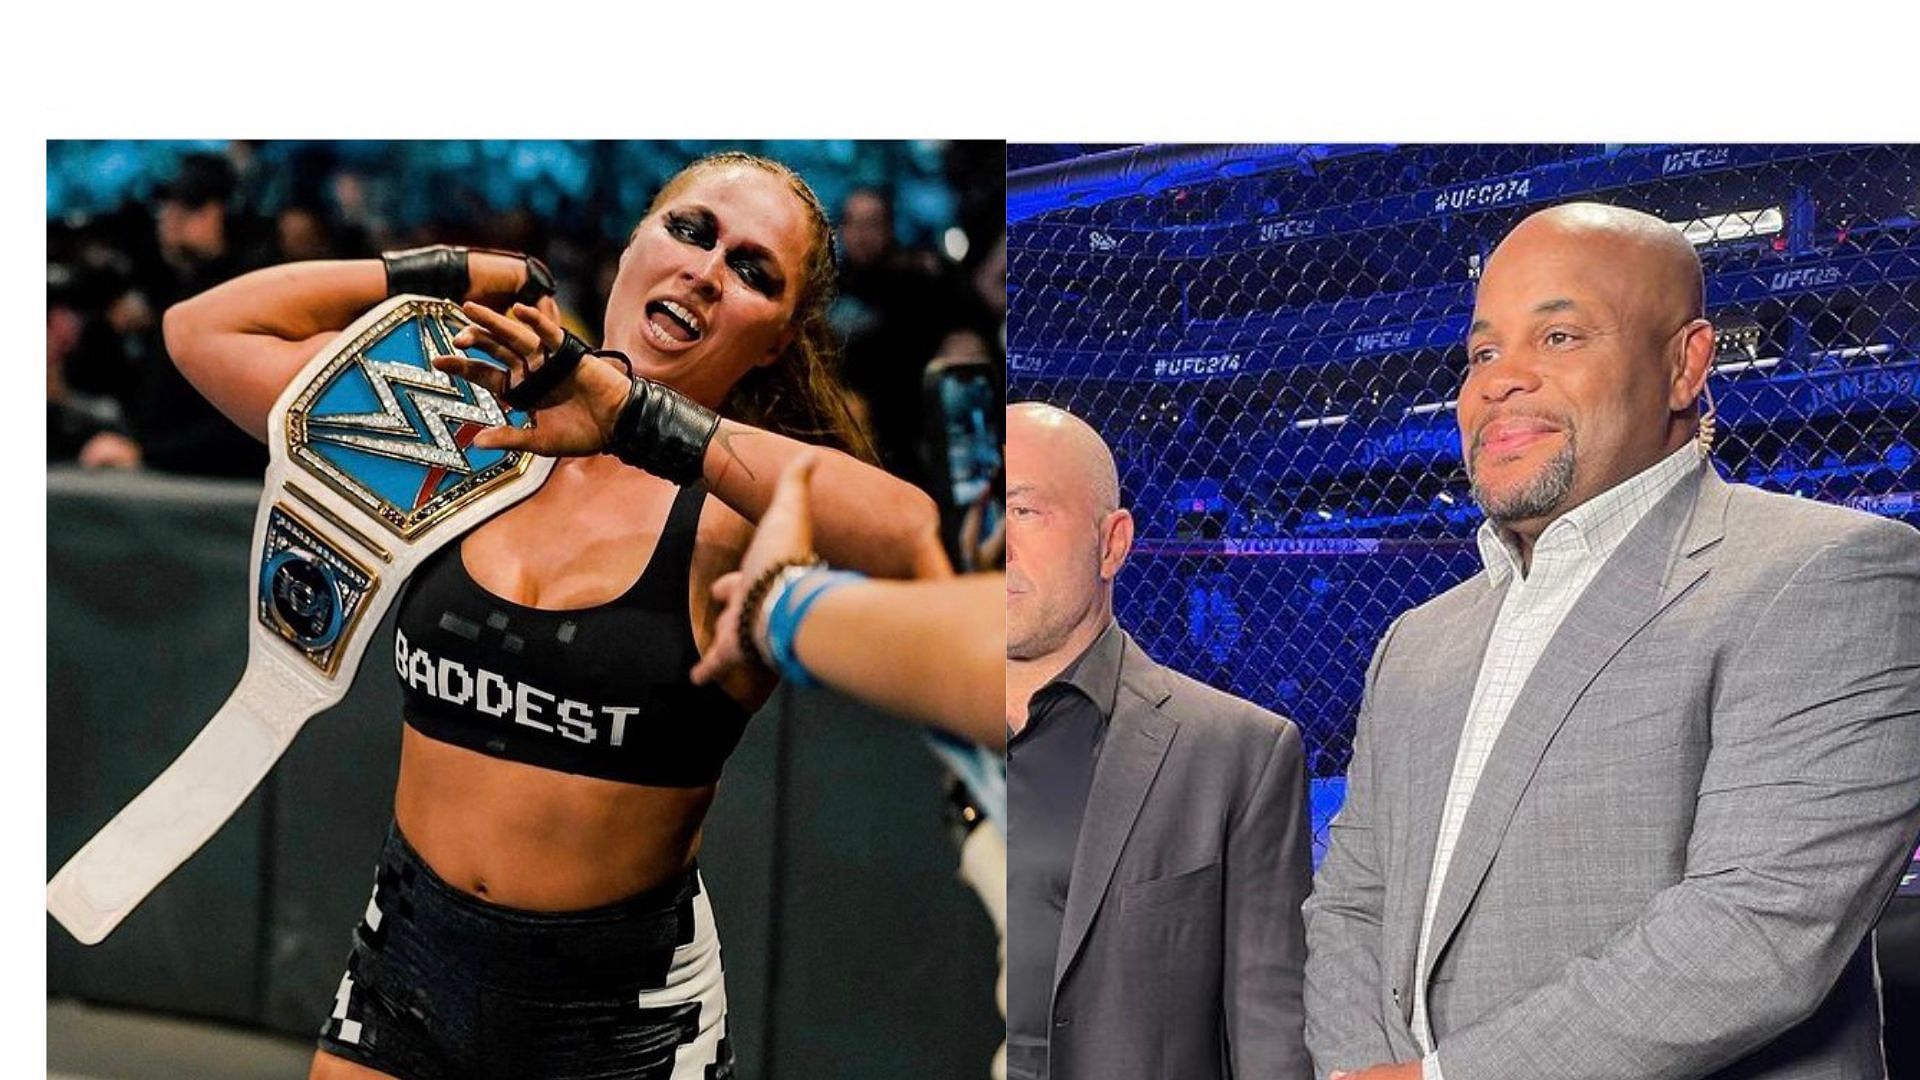 Ronda Rousey (L) and Daniel Cormier (R) [ Images courtesy: @dc_mma and @rondarousey on Instagram]